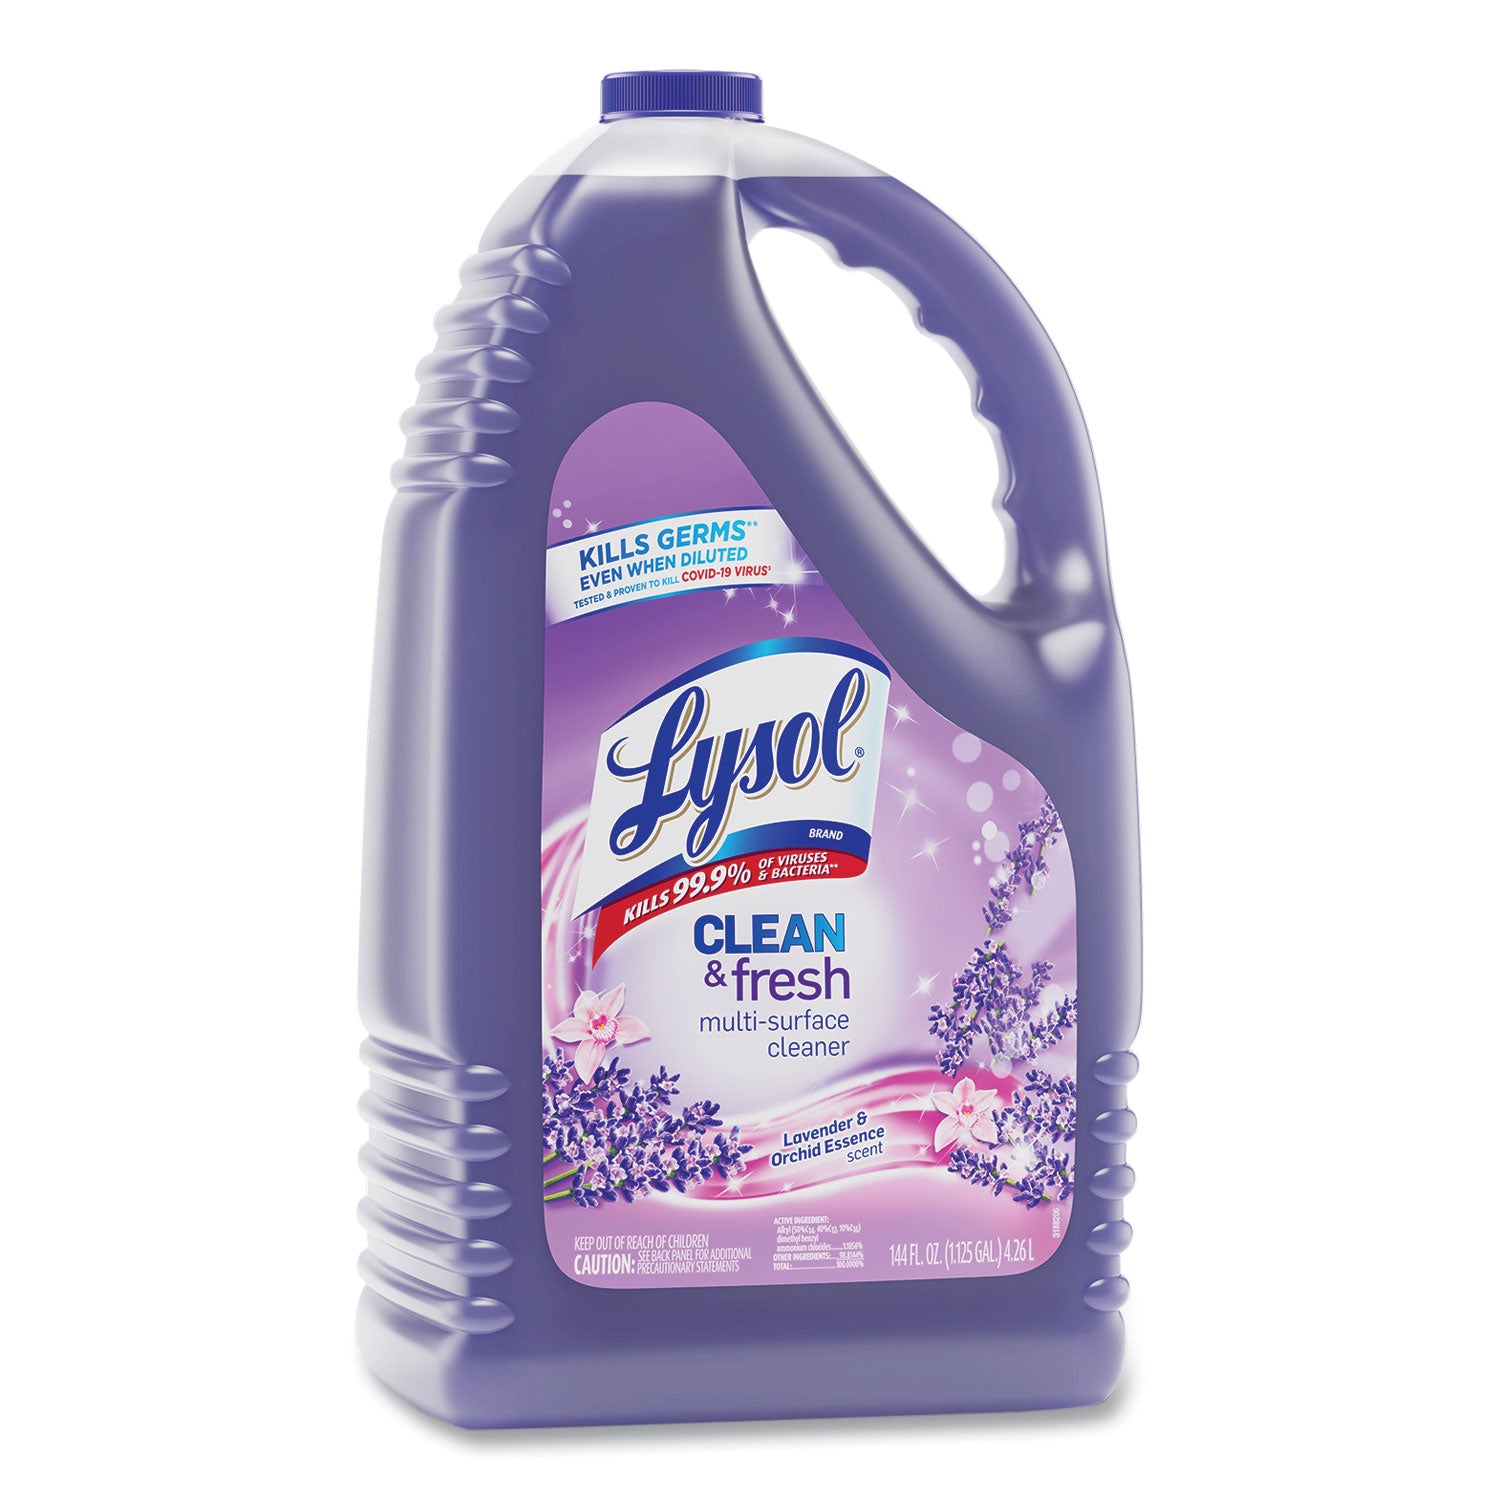 clean-and-fresh-multi-surface-cleaner-lavender-and-orchid-essence-144-oz-bottle_rac88786ea - 1